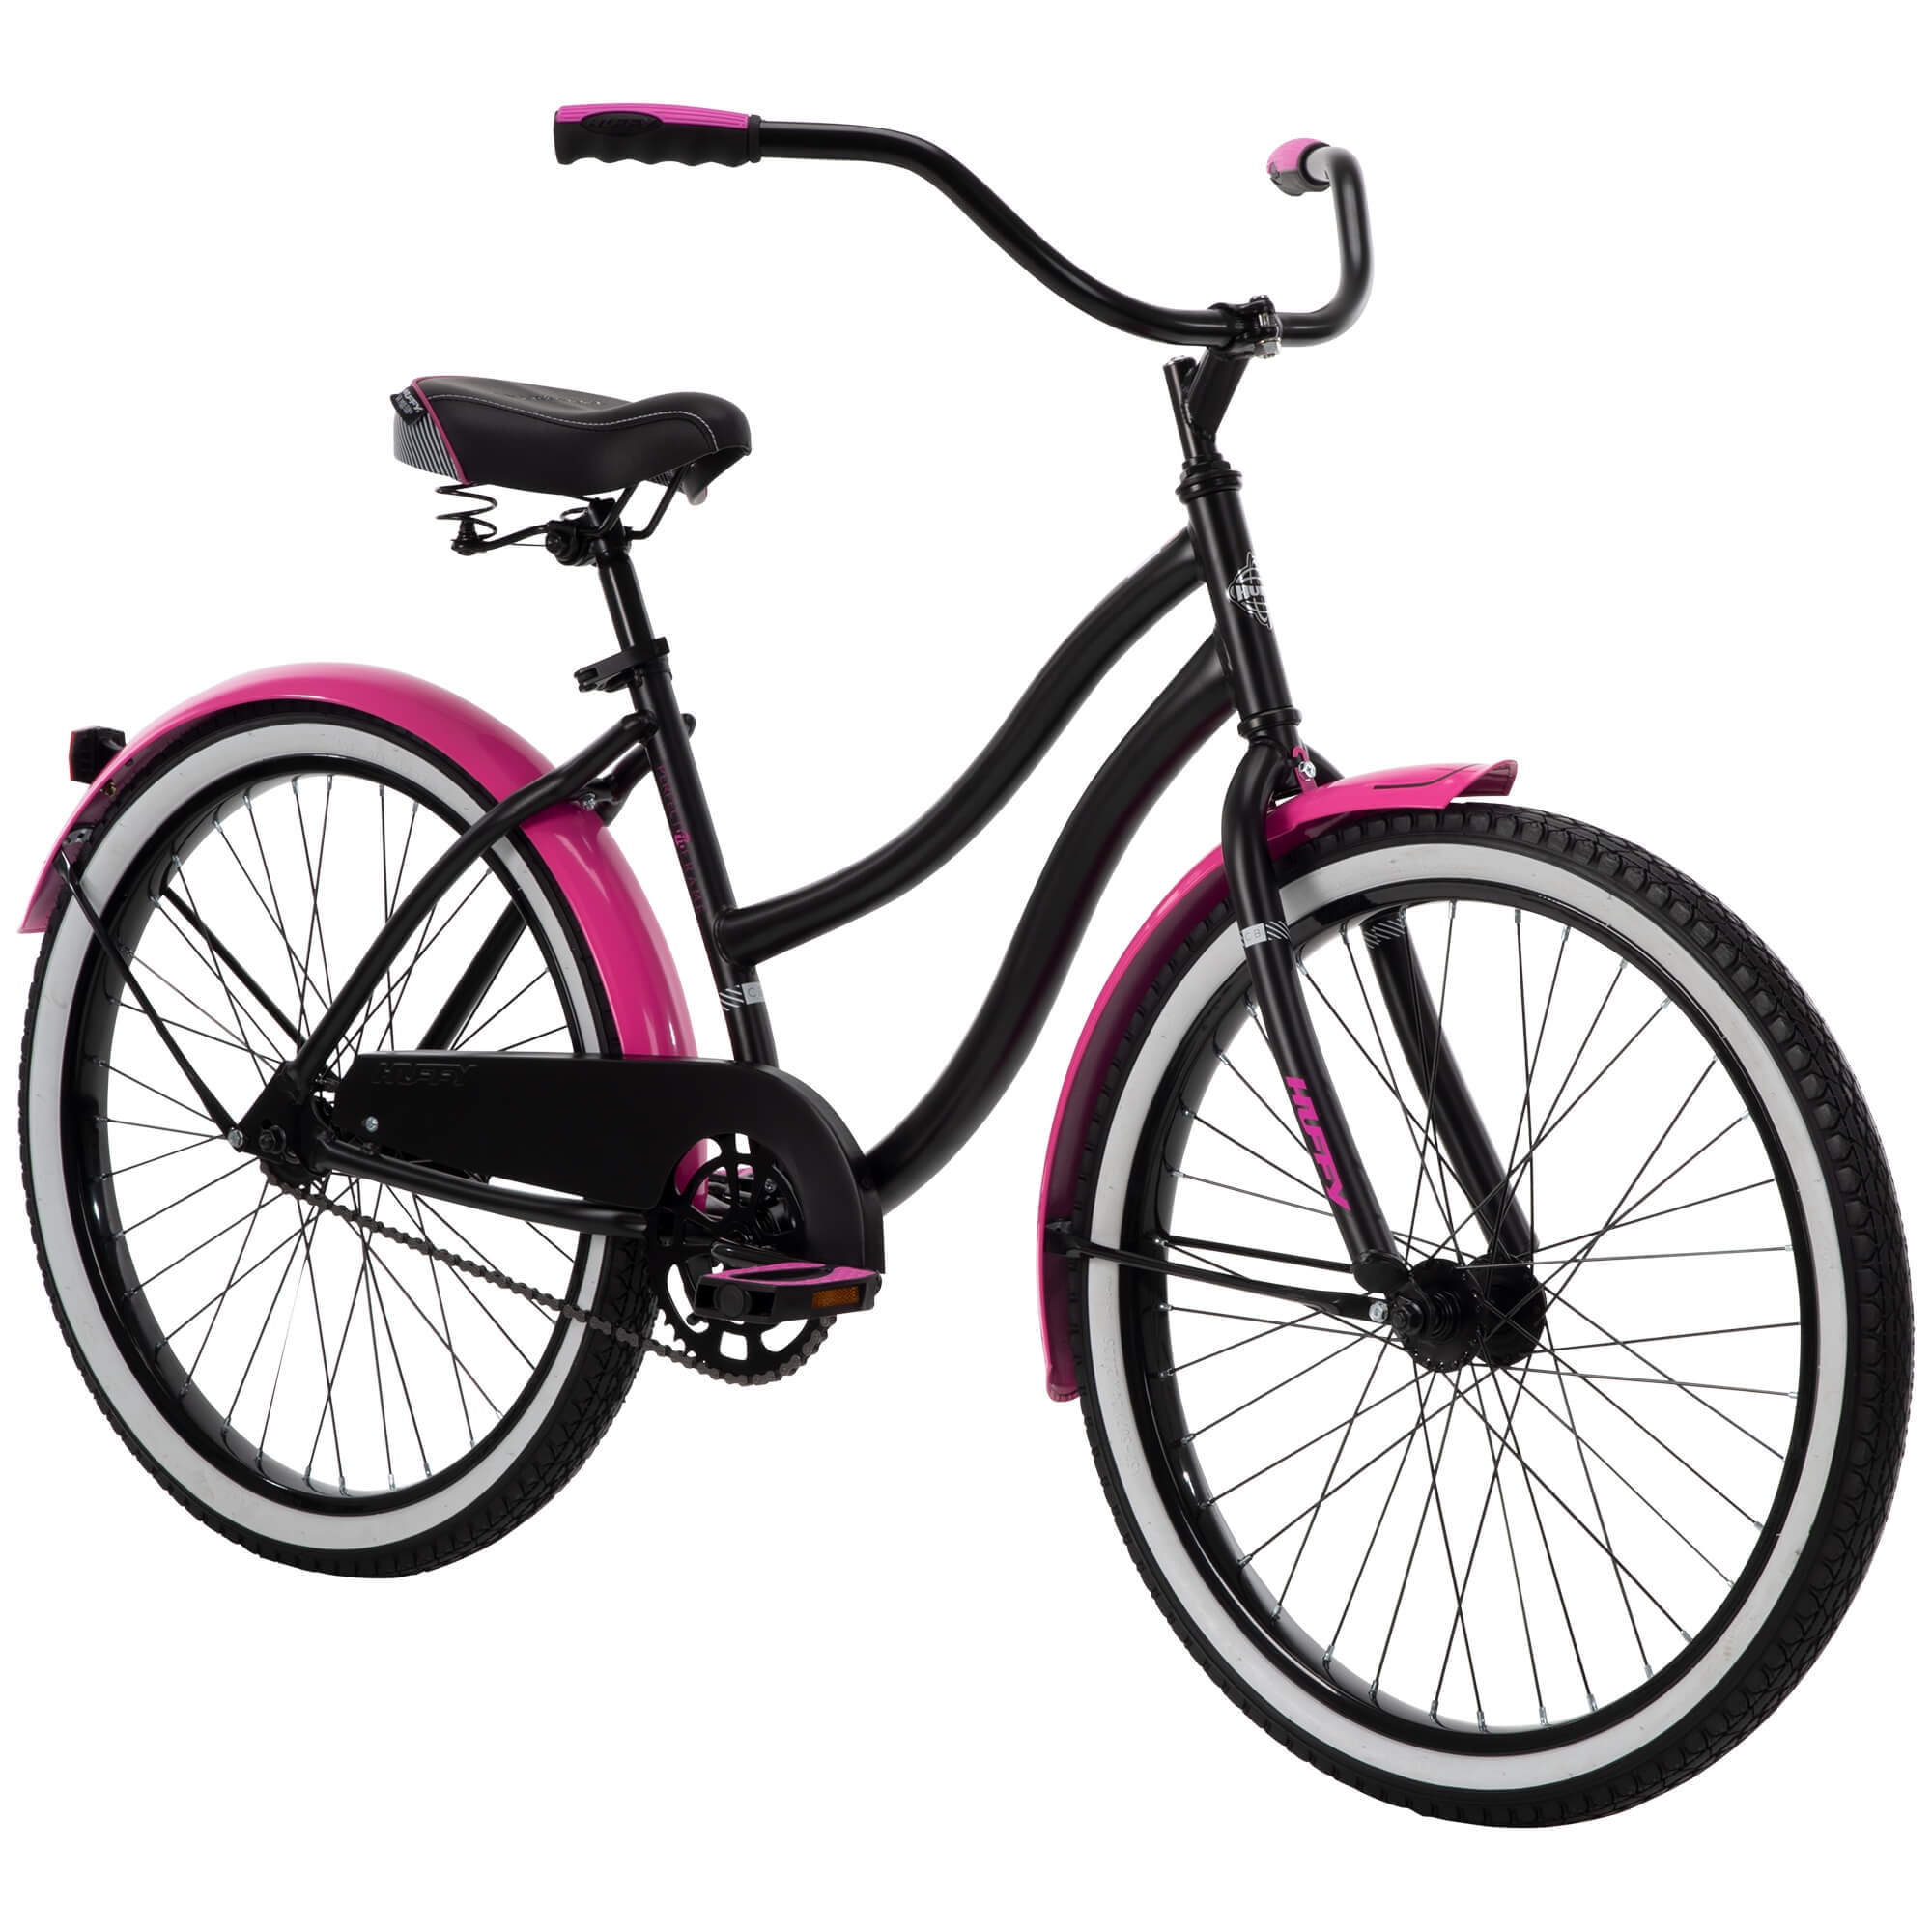 Huffy 26" Cranbrook Women's Cruiser Bike with Perfect Fit Frame Black Pink